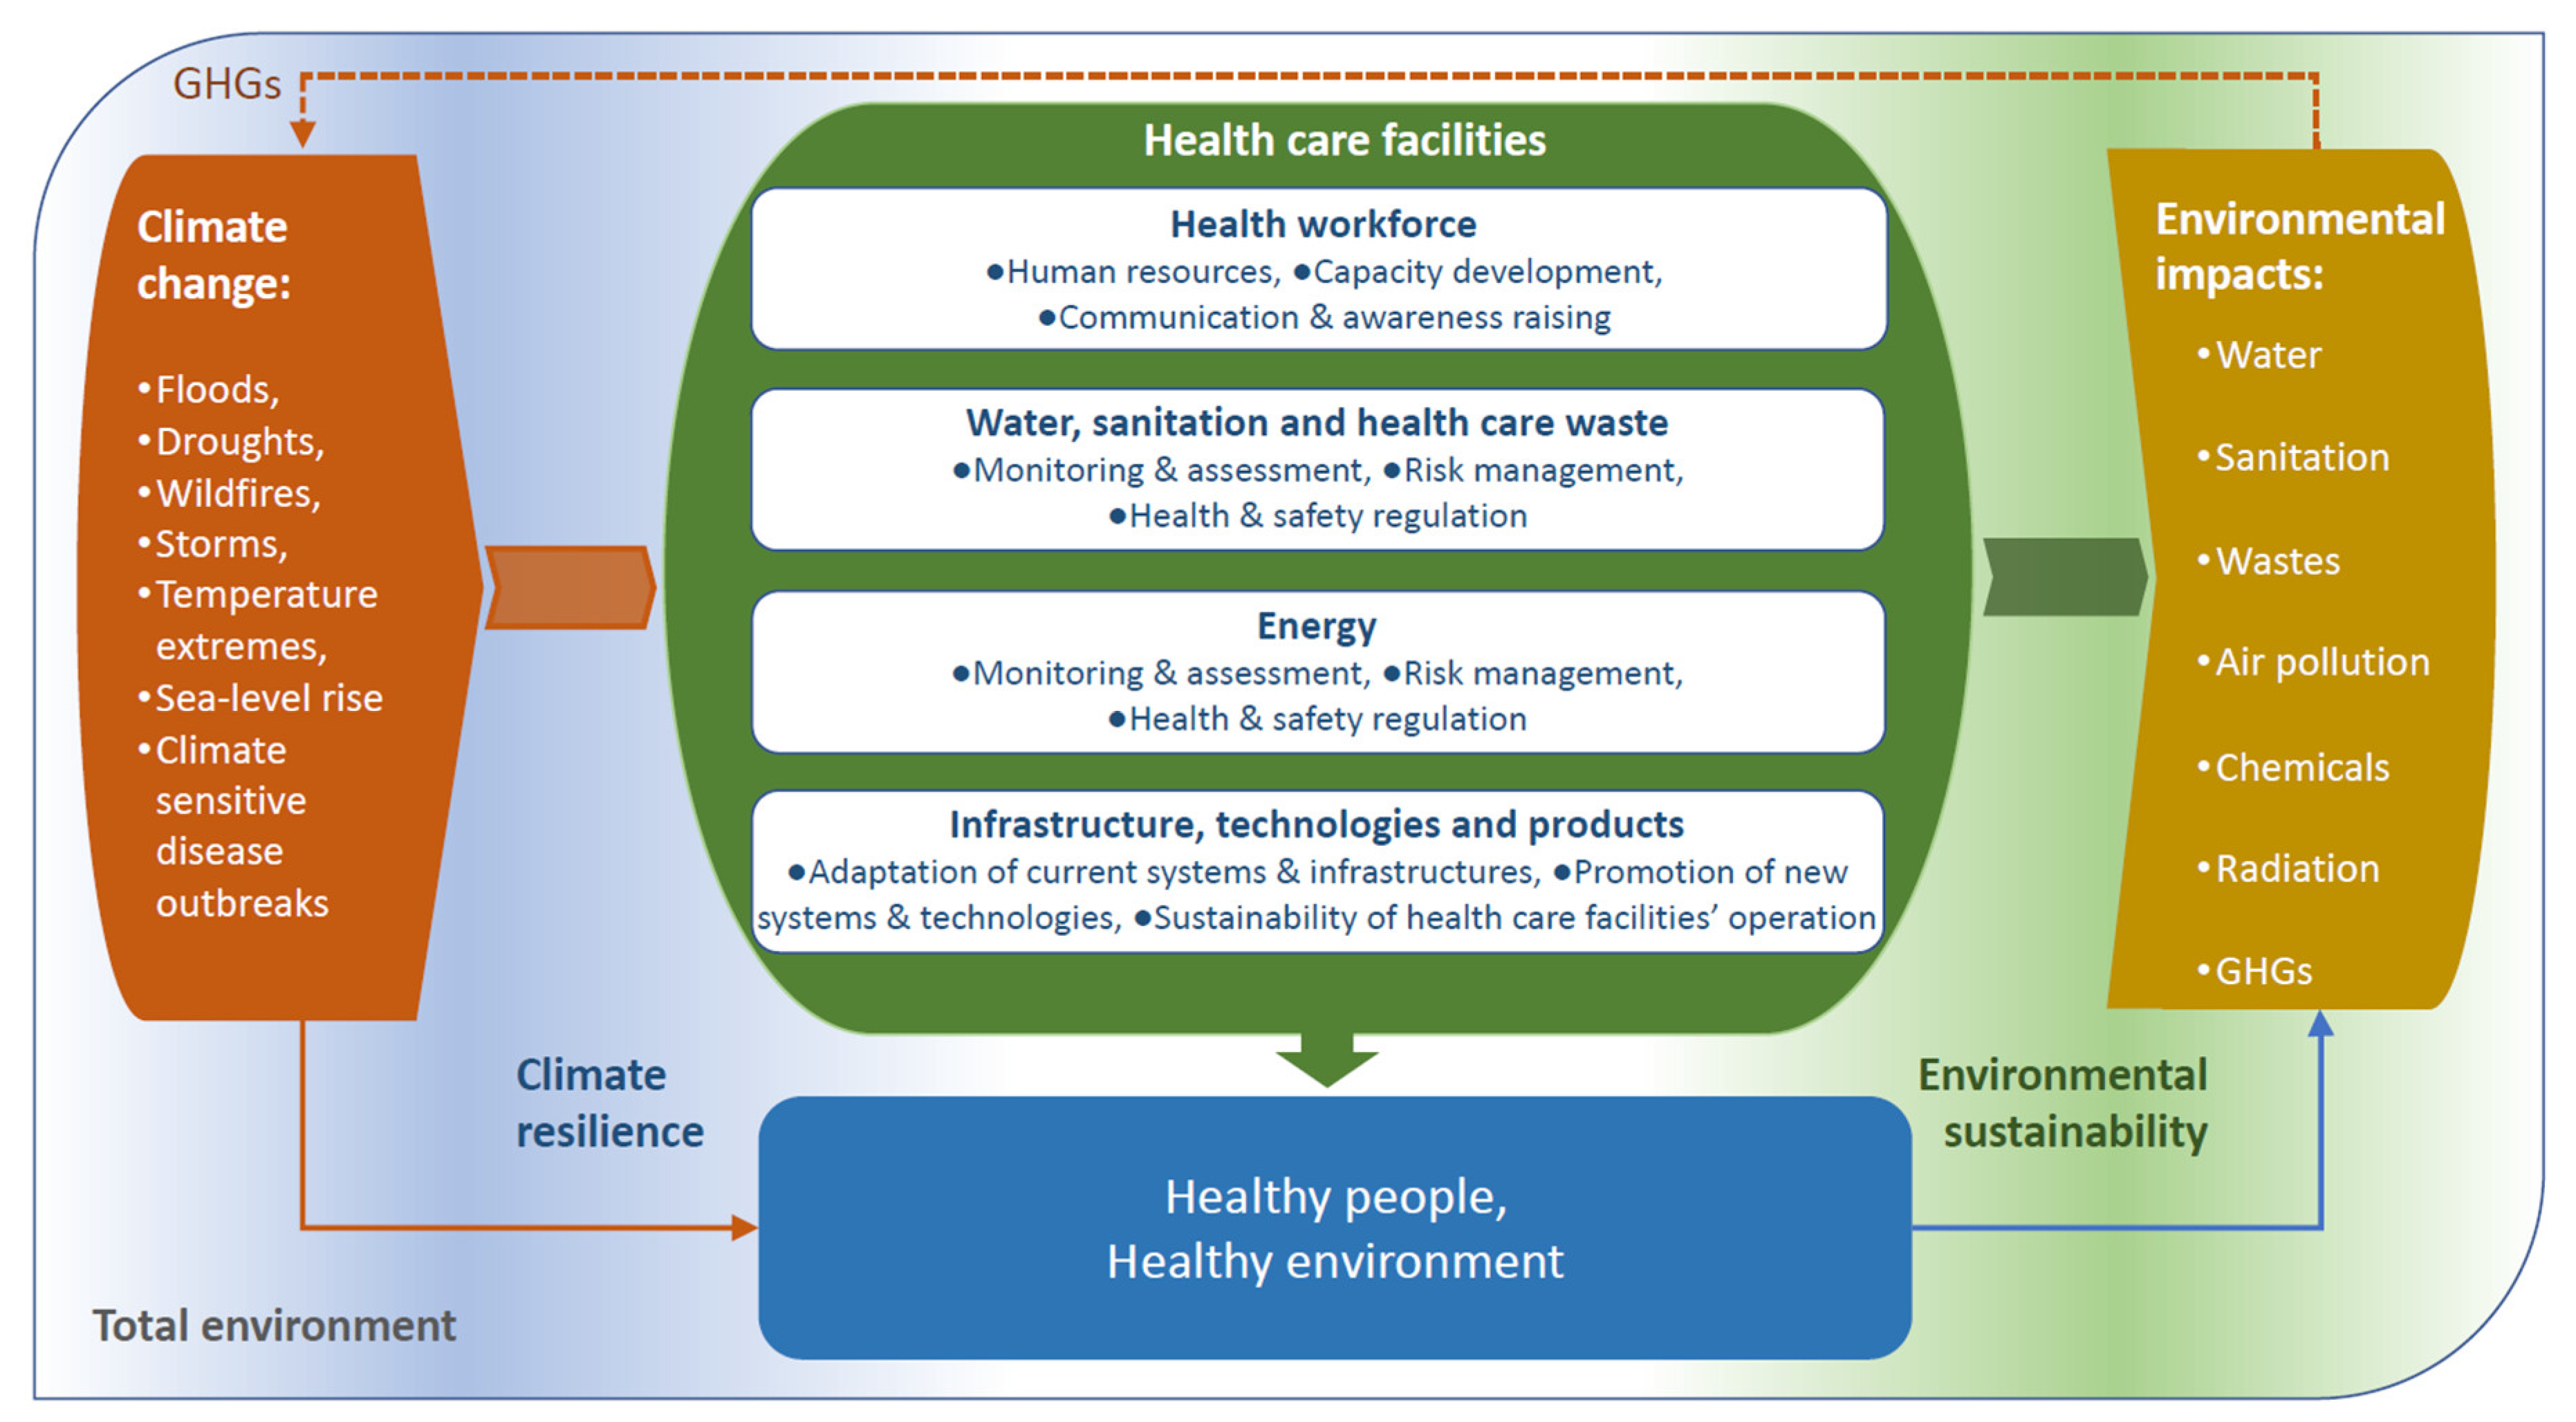 III. Green Energy Solutions for Health Care Facilities